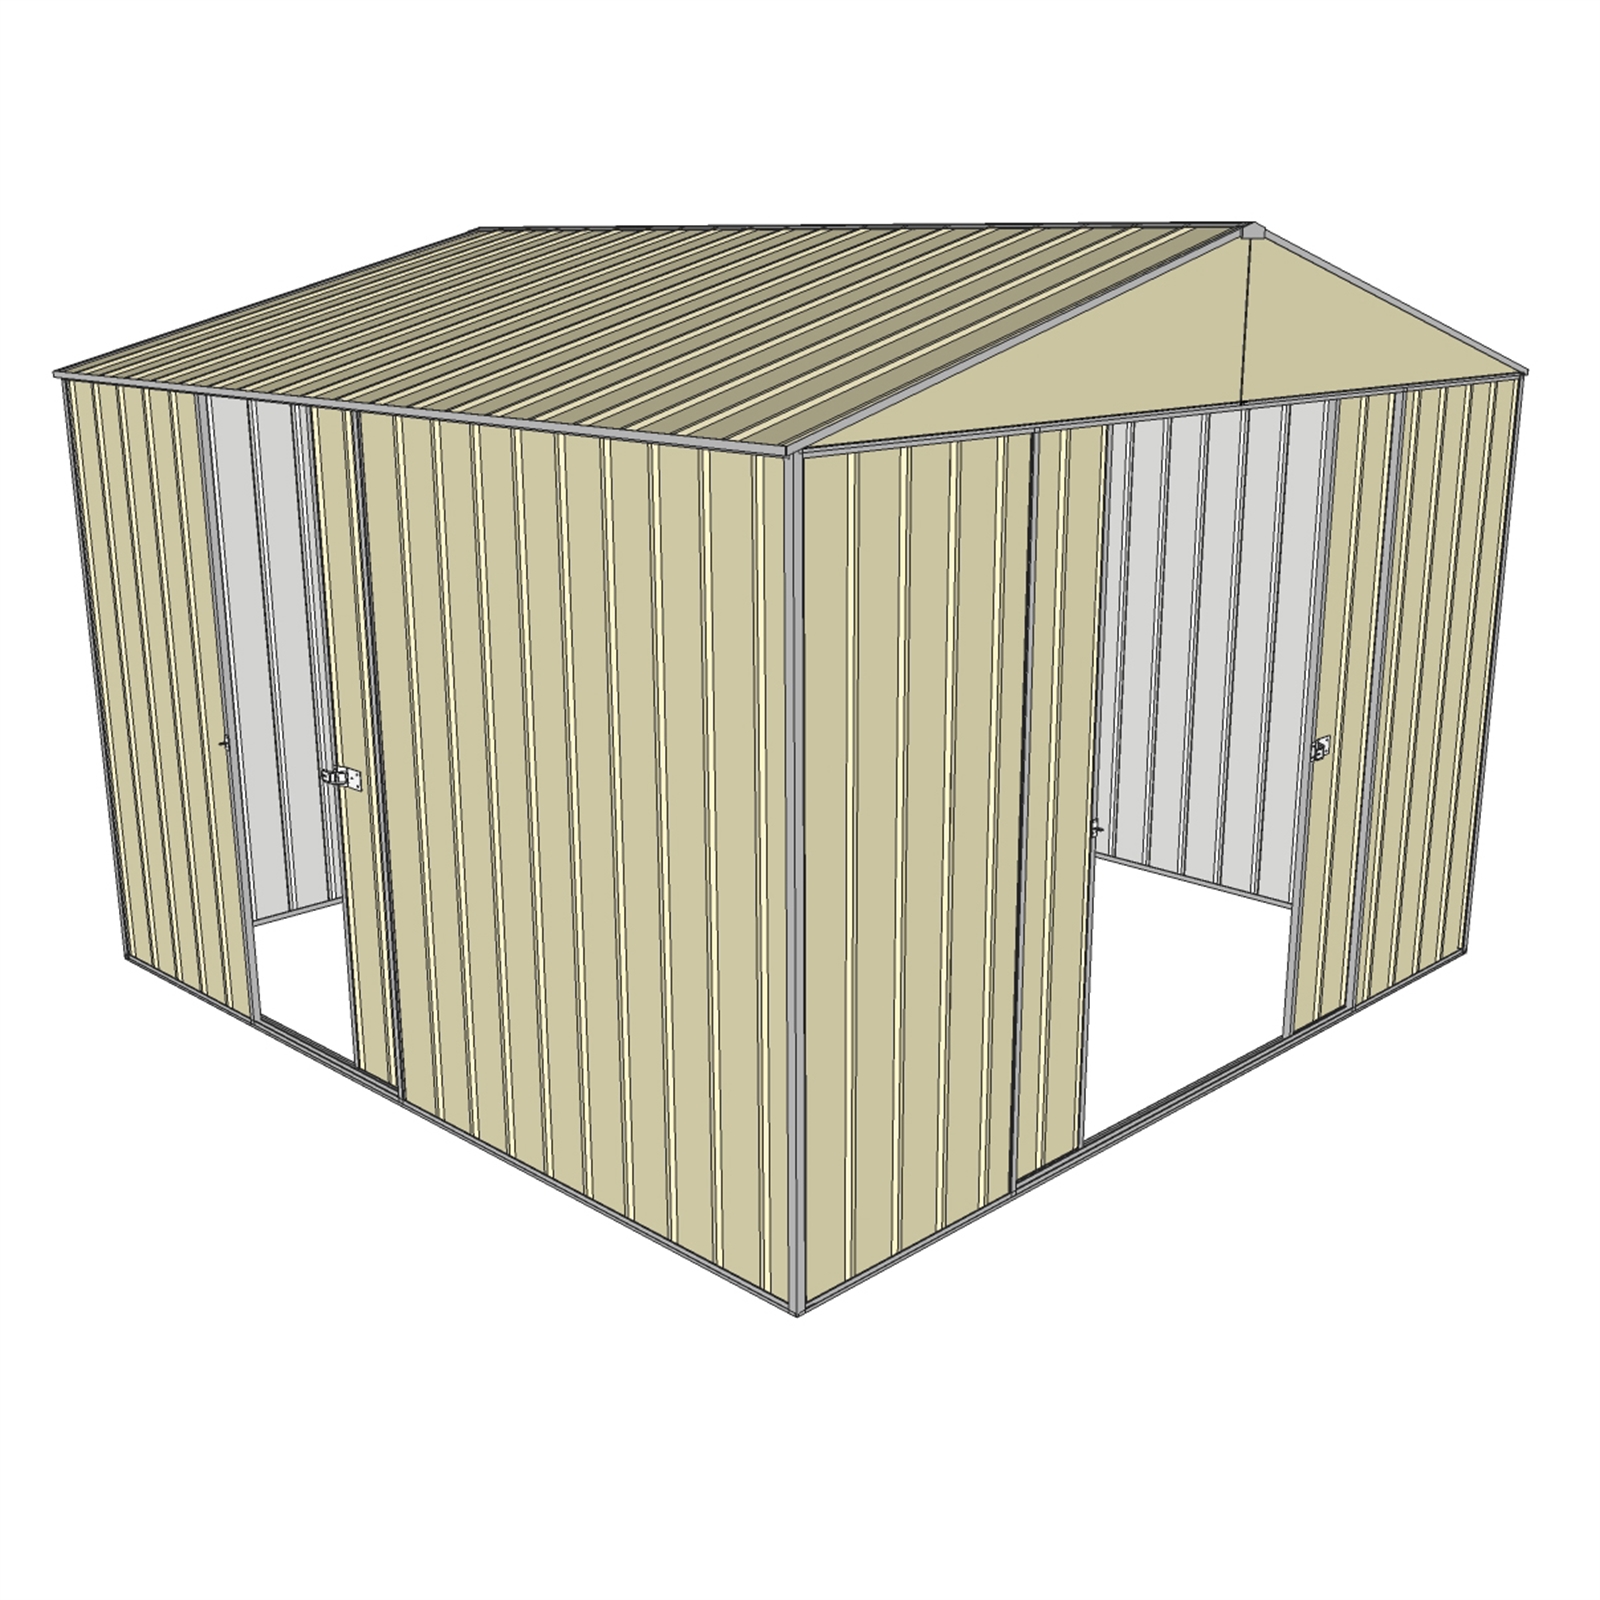 Build-a-Shed 3.0 x 2.3 x 3.0m Cream Triple Sliding Door Shed